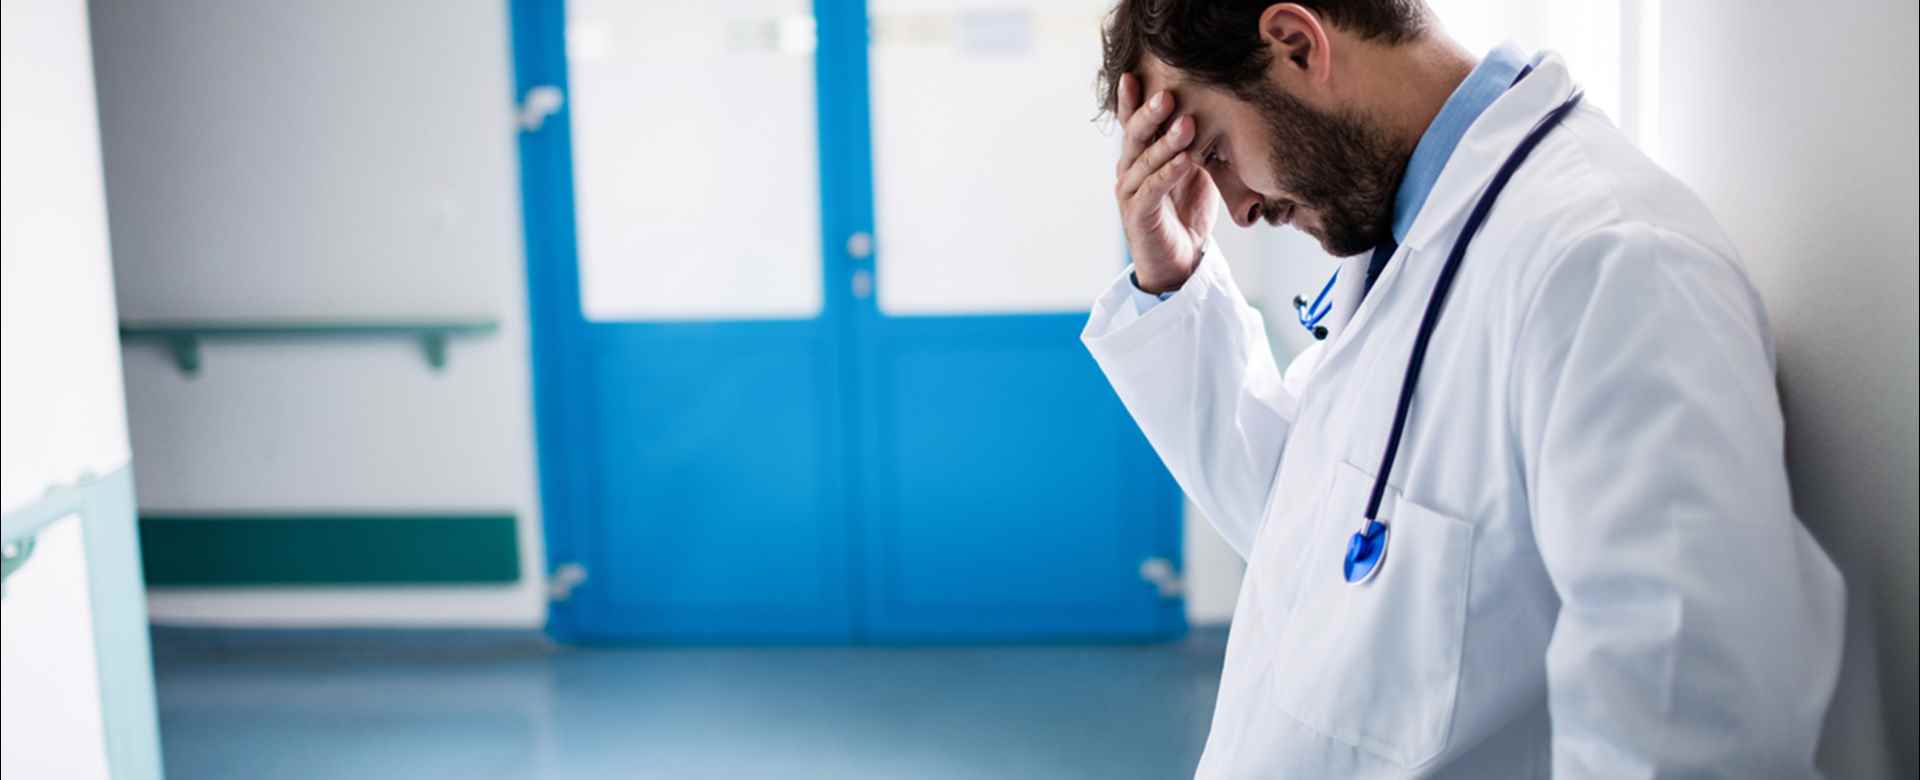 A Look at Physician Burnout